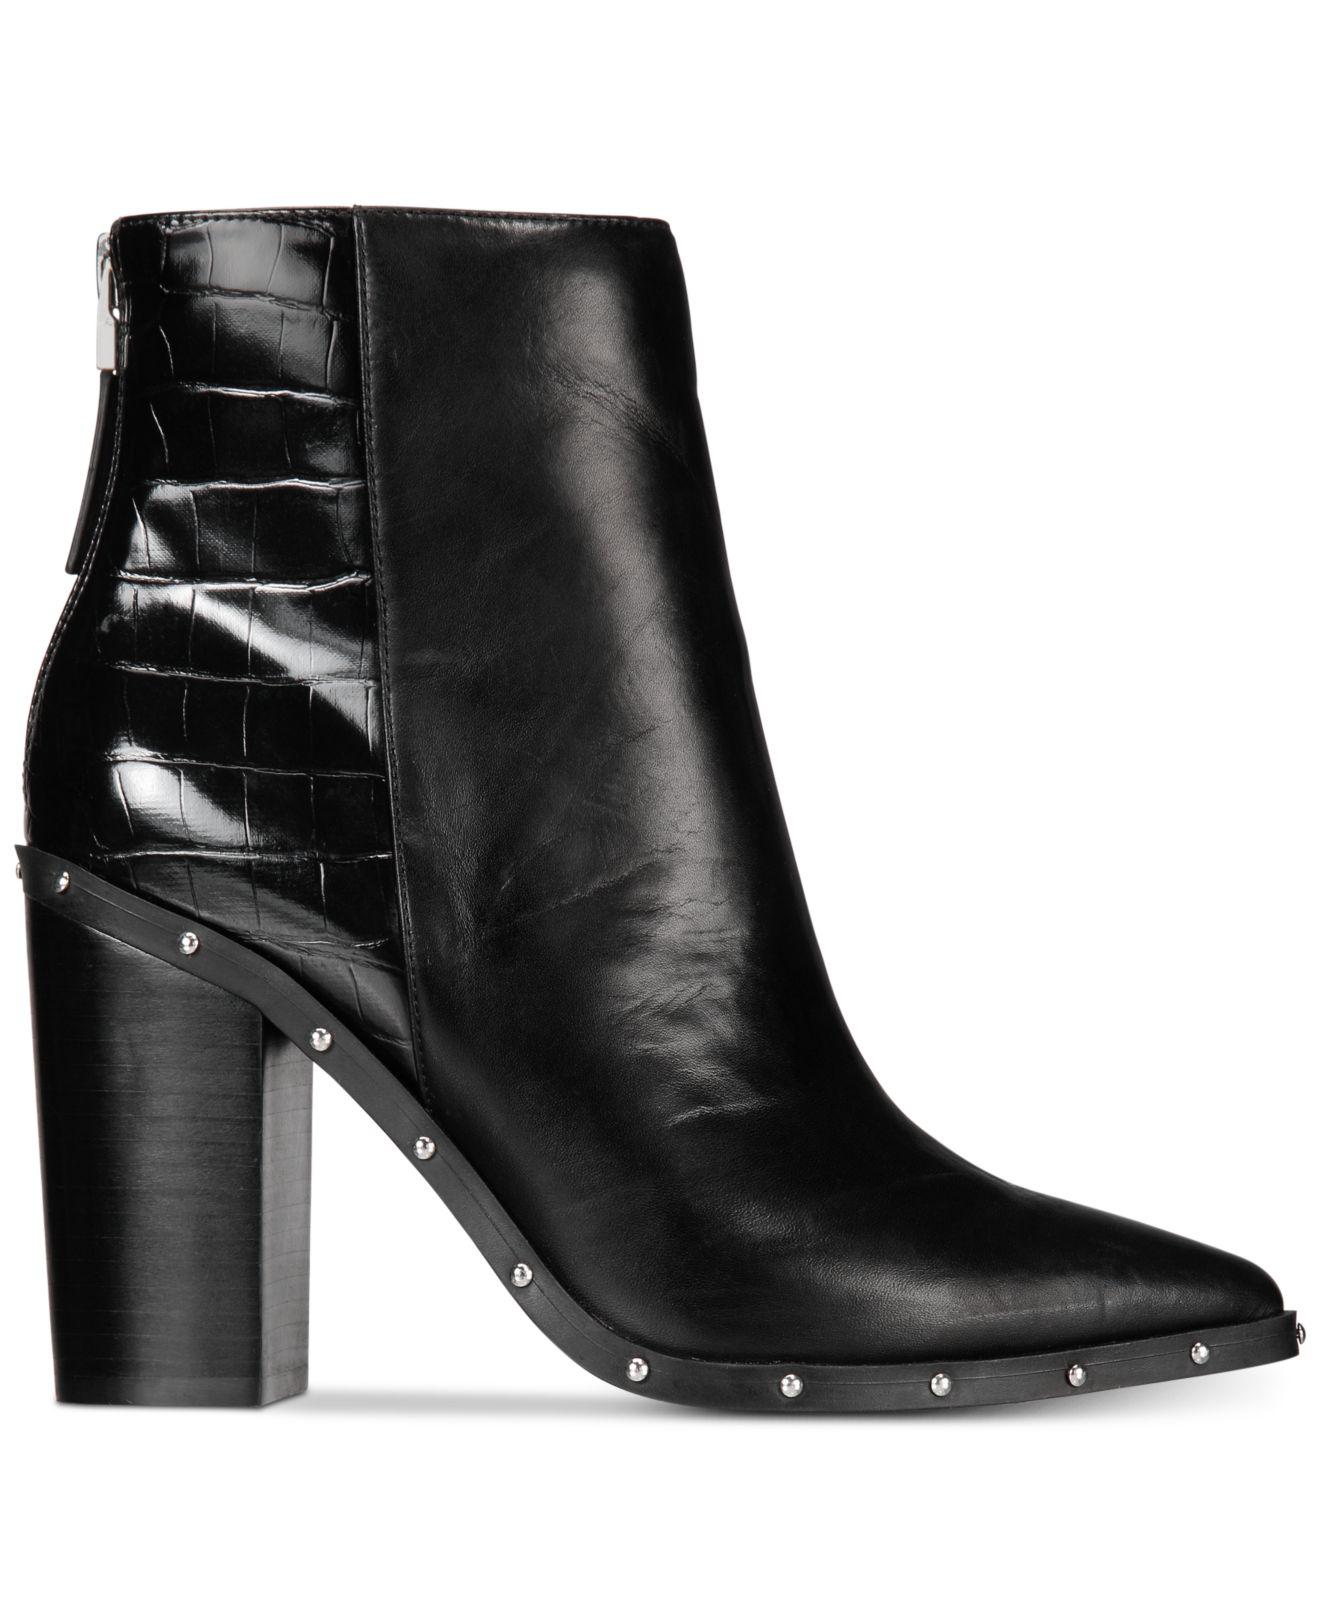 ALDO Leather Ibalenna Boots in Black - Lyst